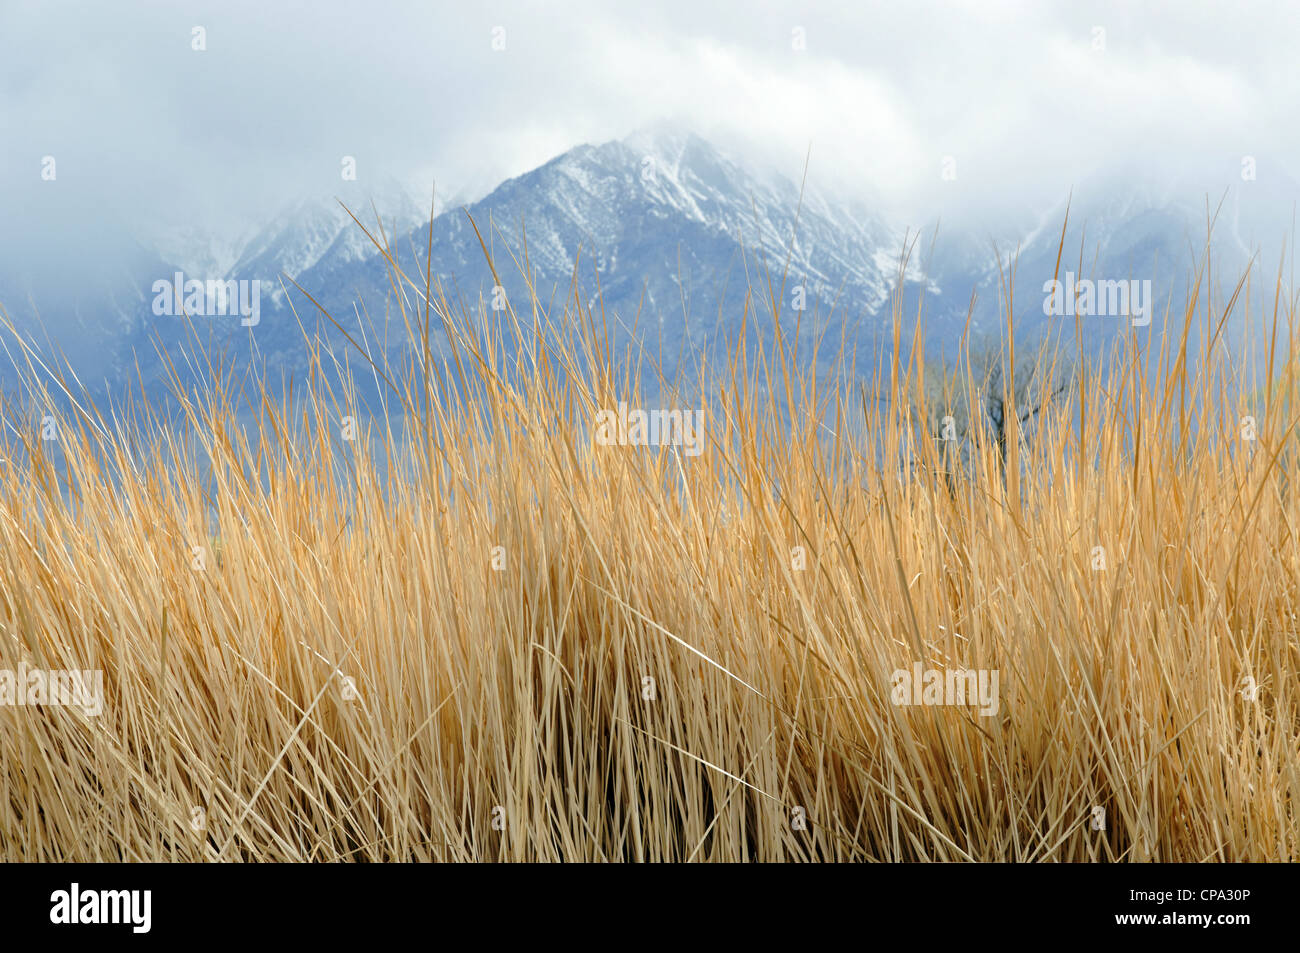 Reeds at Twin Lakes, with Sierra Nevada Mountains in background, nr Independence, California, USA. Stock Photo